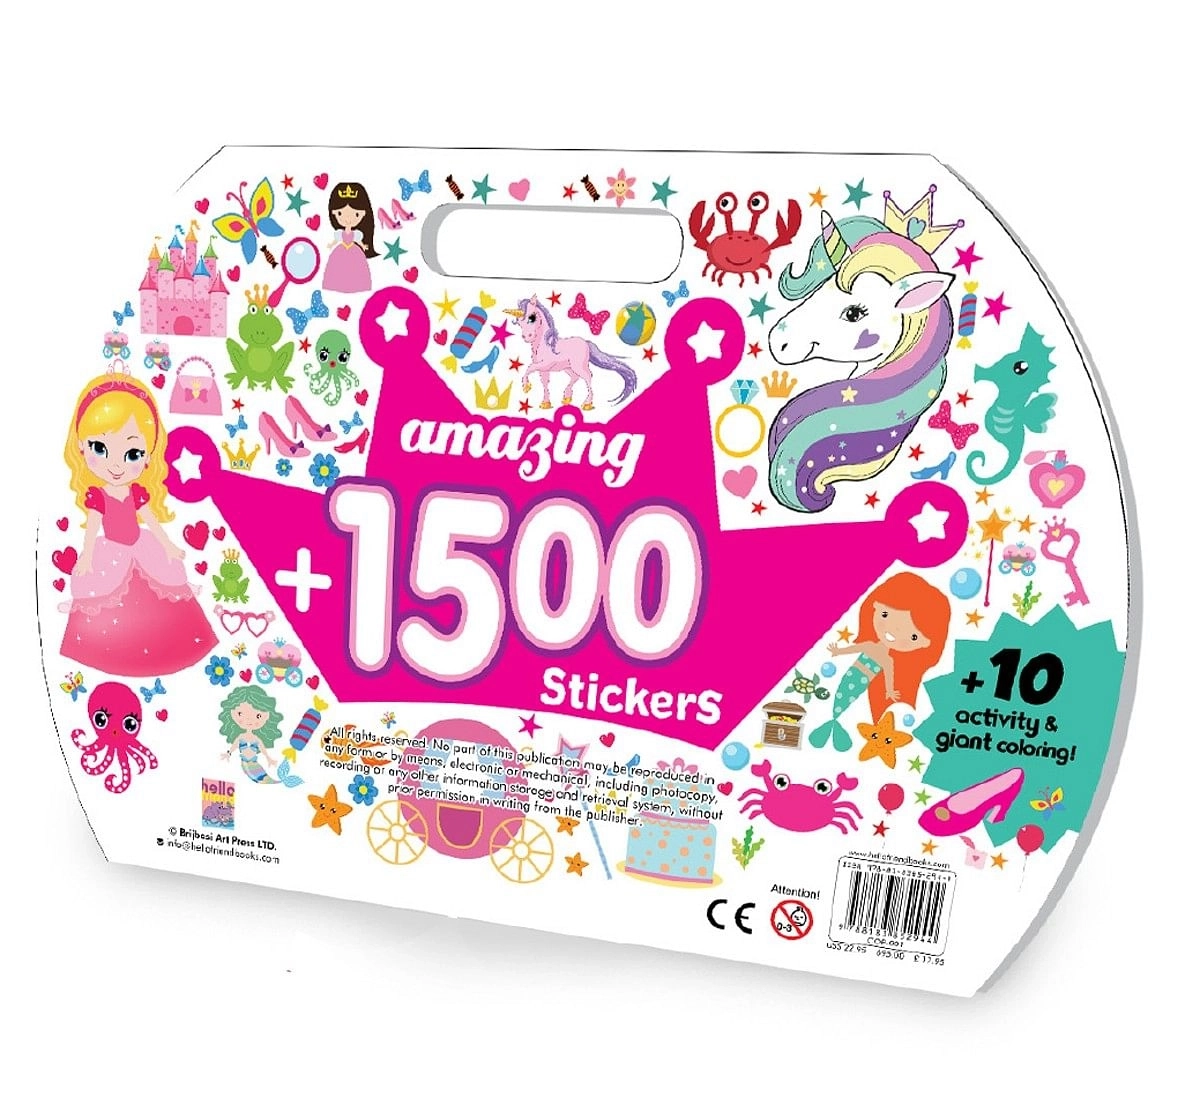 Hellofriend Books 1500 Giant Stickers Activity and Colouring Pad Multicolor 5Y+